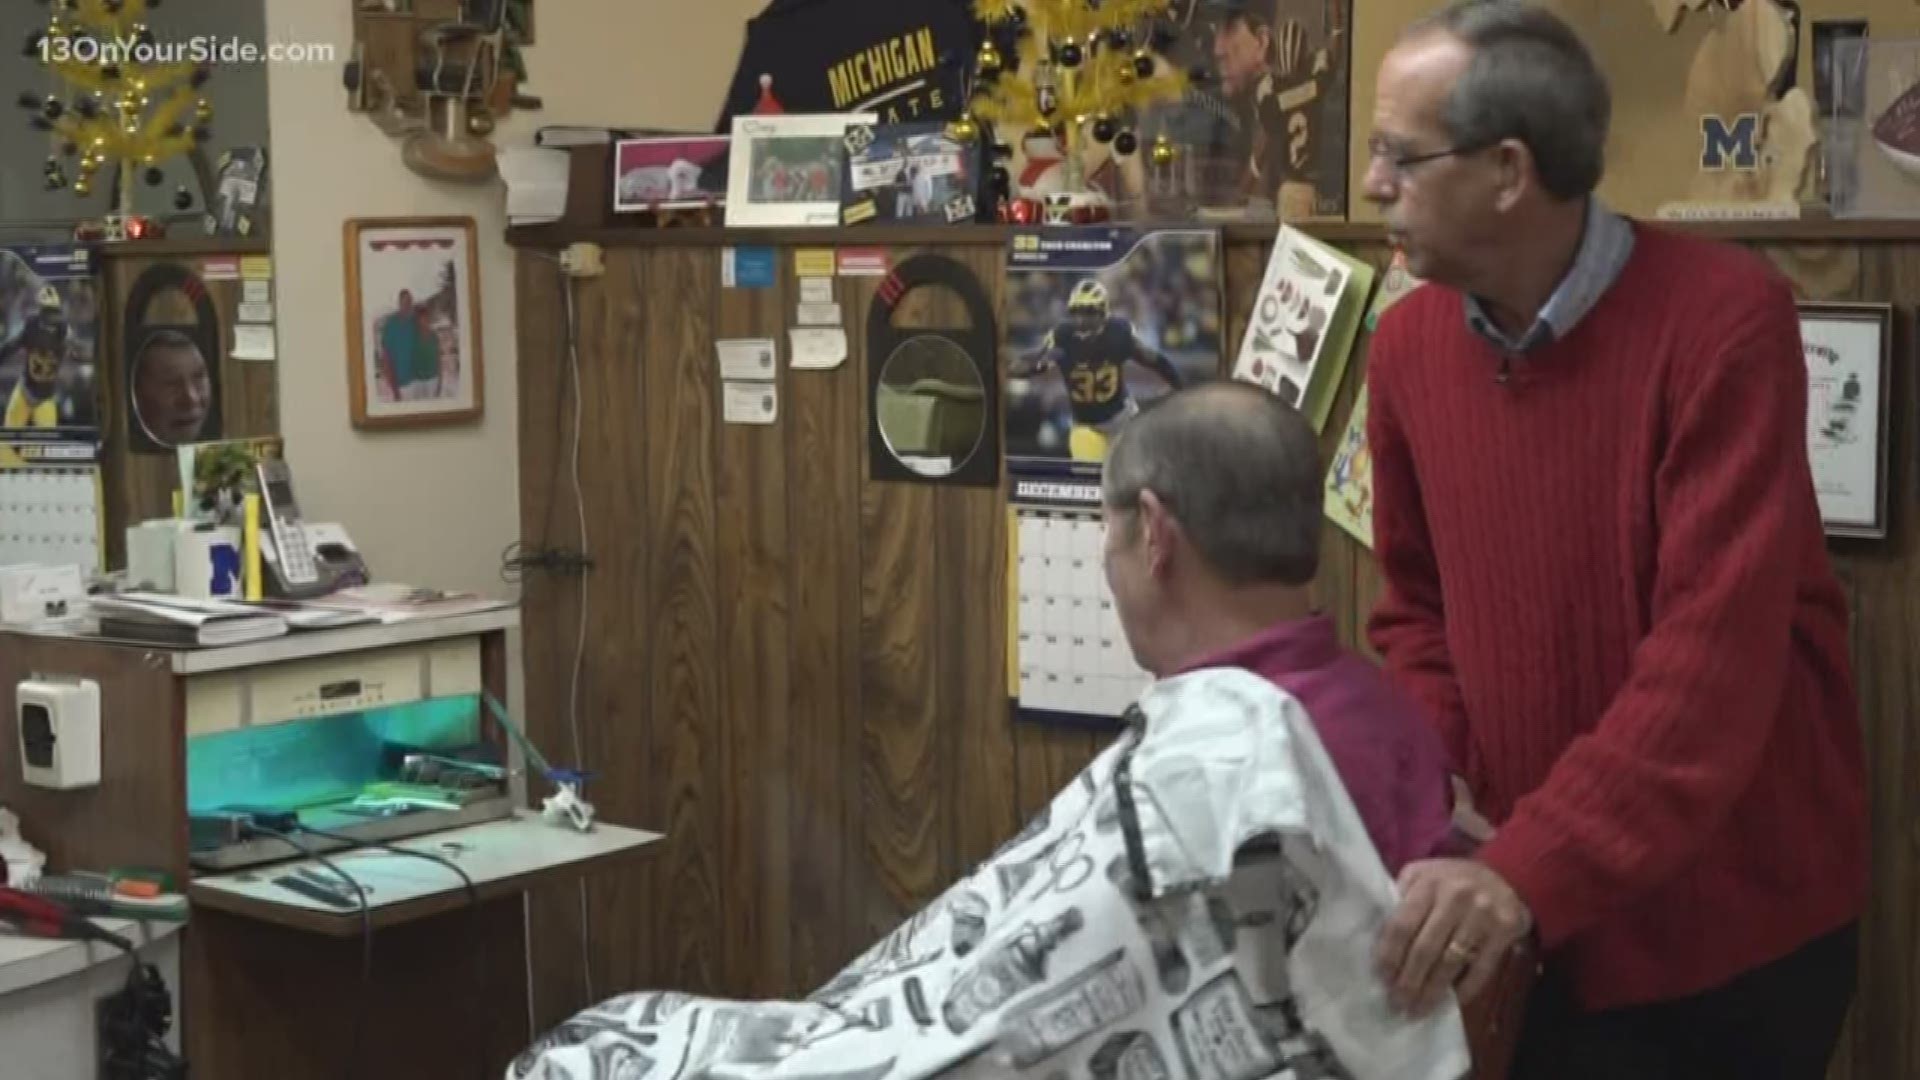 Ken Kloostra is deciding to hang up the clippers after more than 40 years at Mr. Hair to spend quality time with his wife.